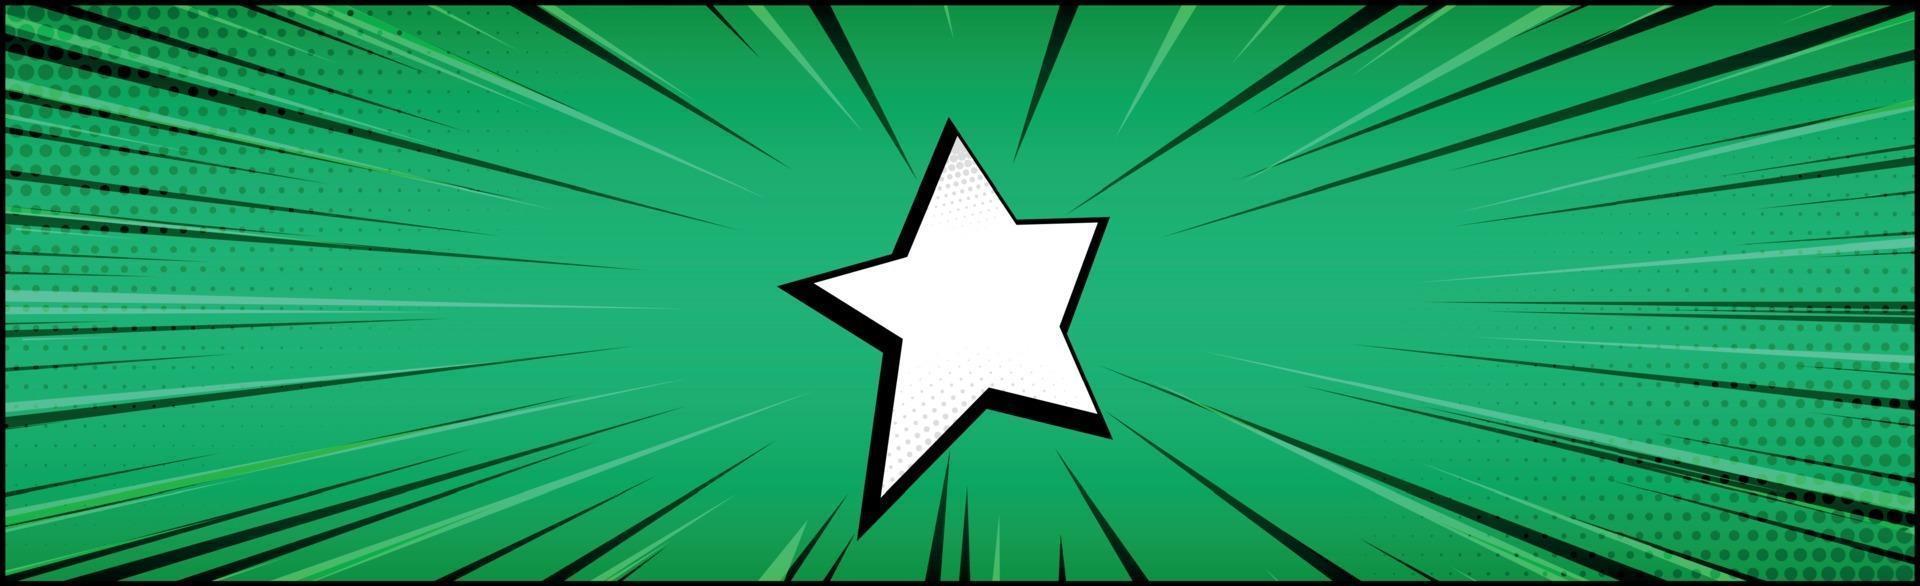 Panoramic green comic zoom with lines - Vector